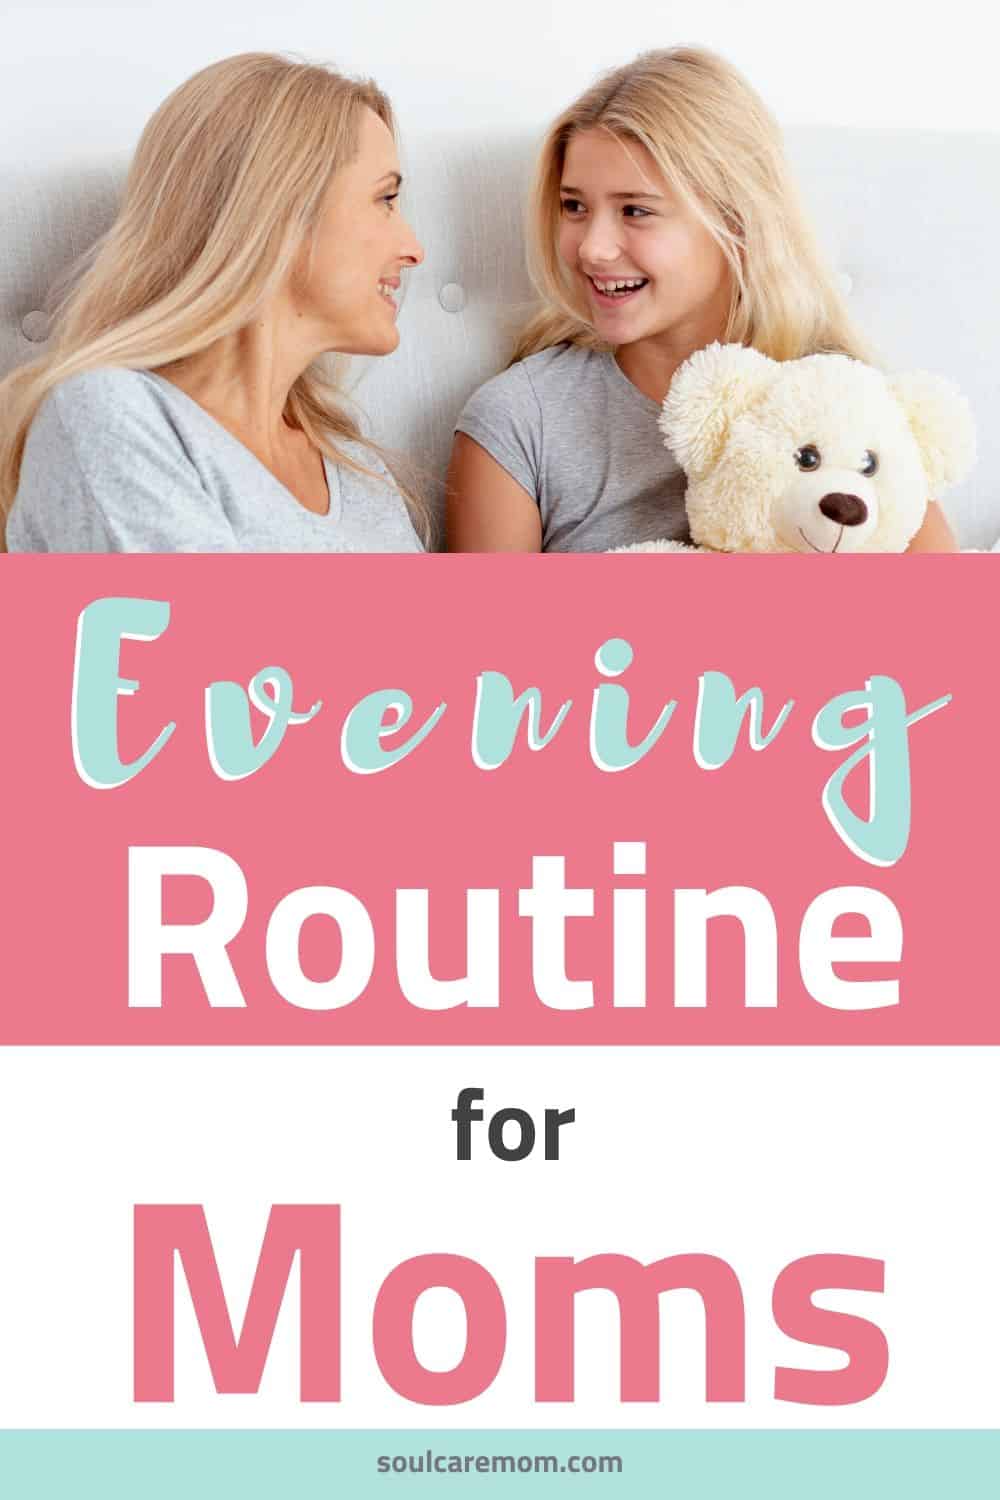 Evening Routine for Moms - Soul Care Mom - Mom and Daughter at Bedtime